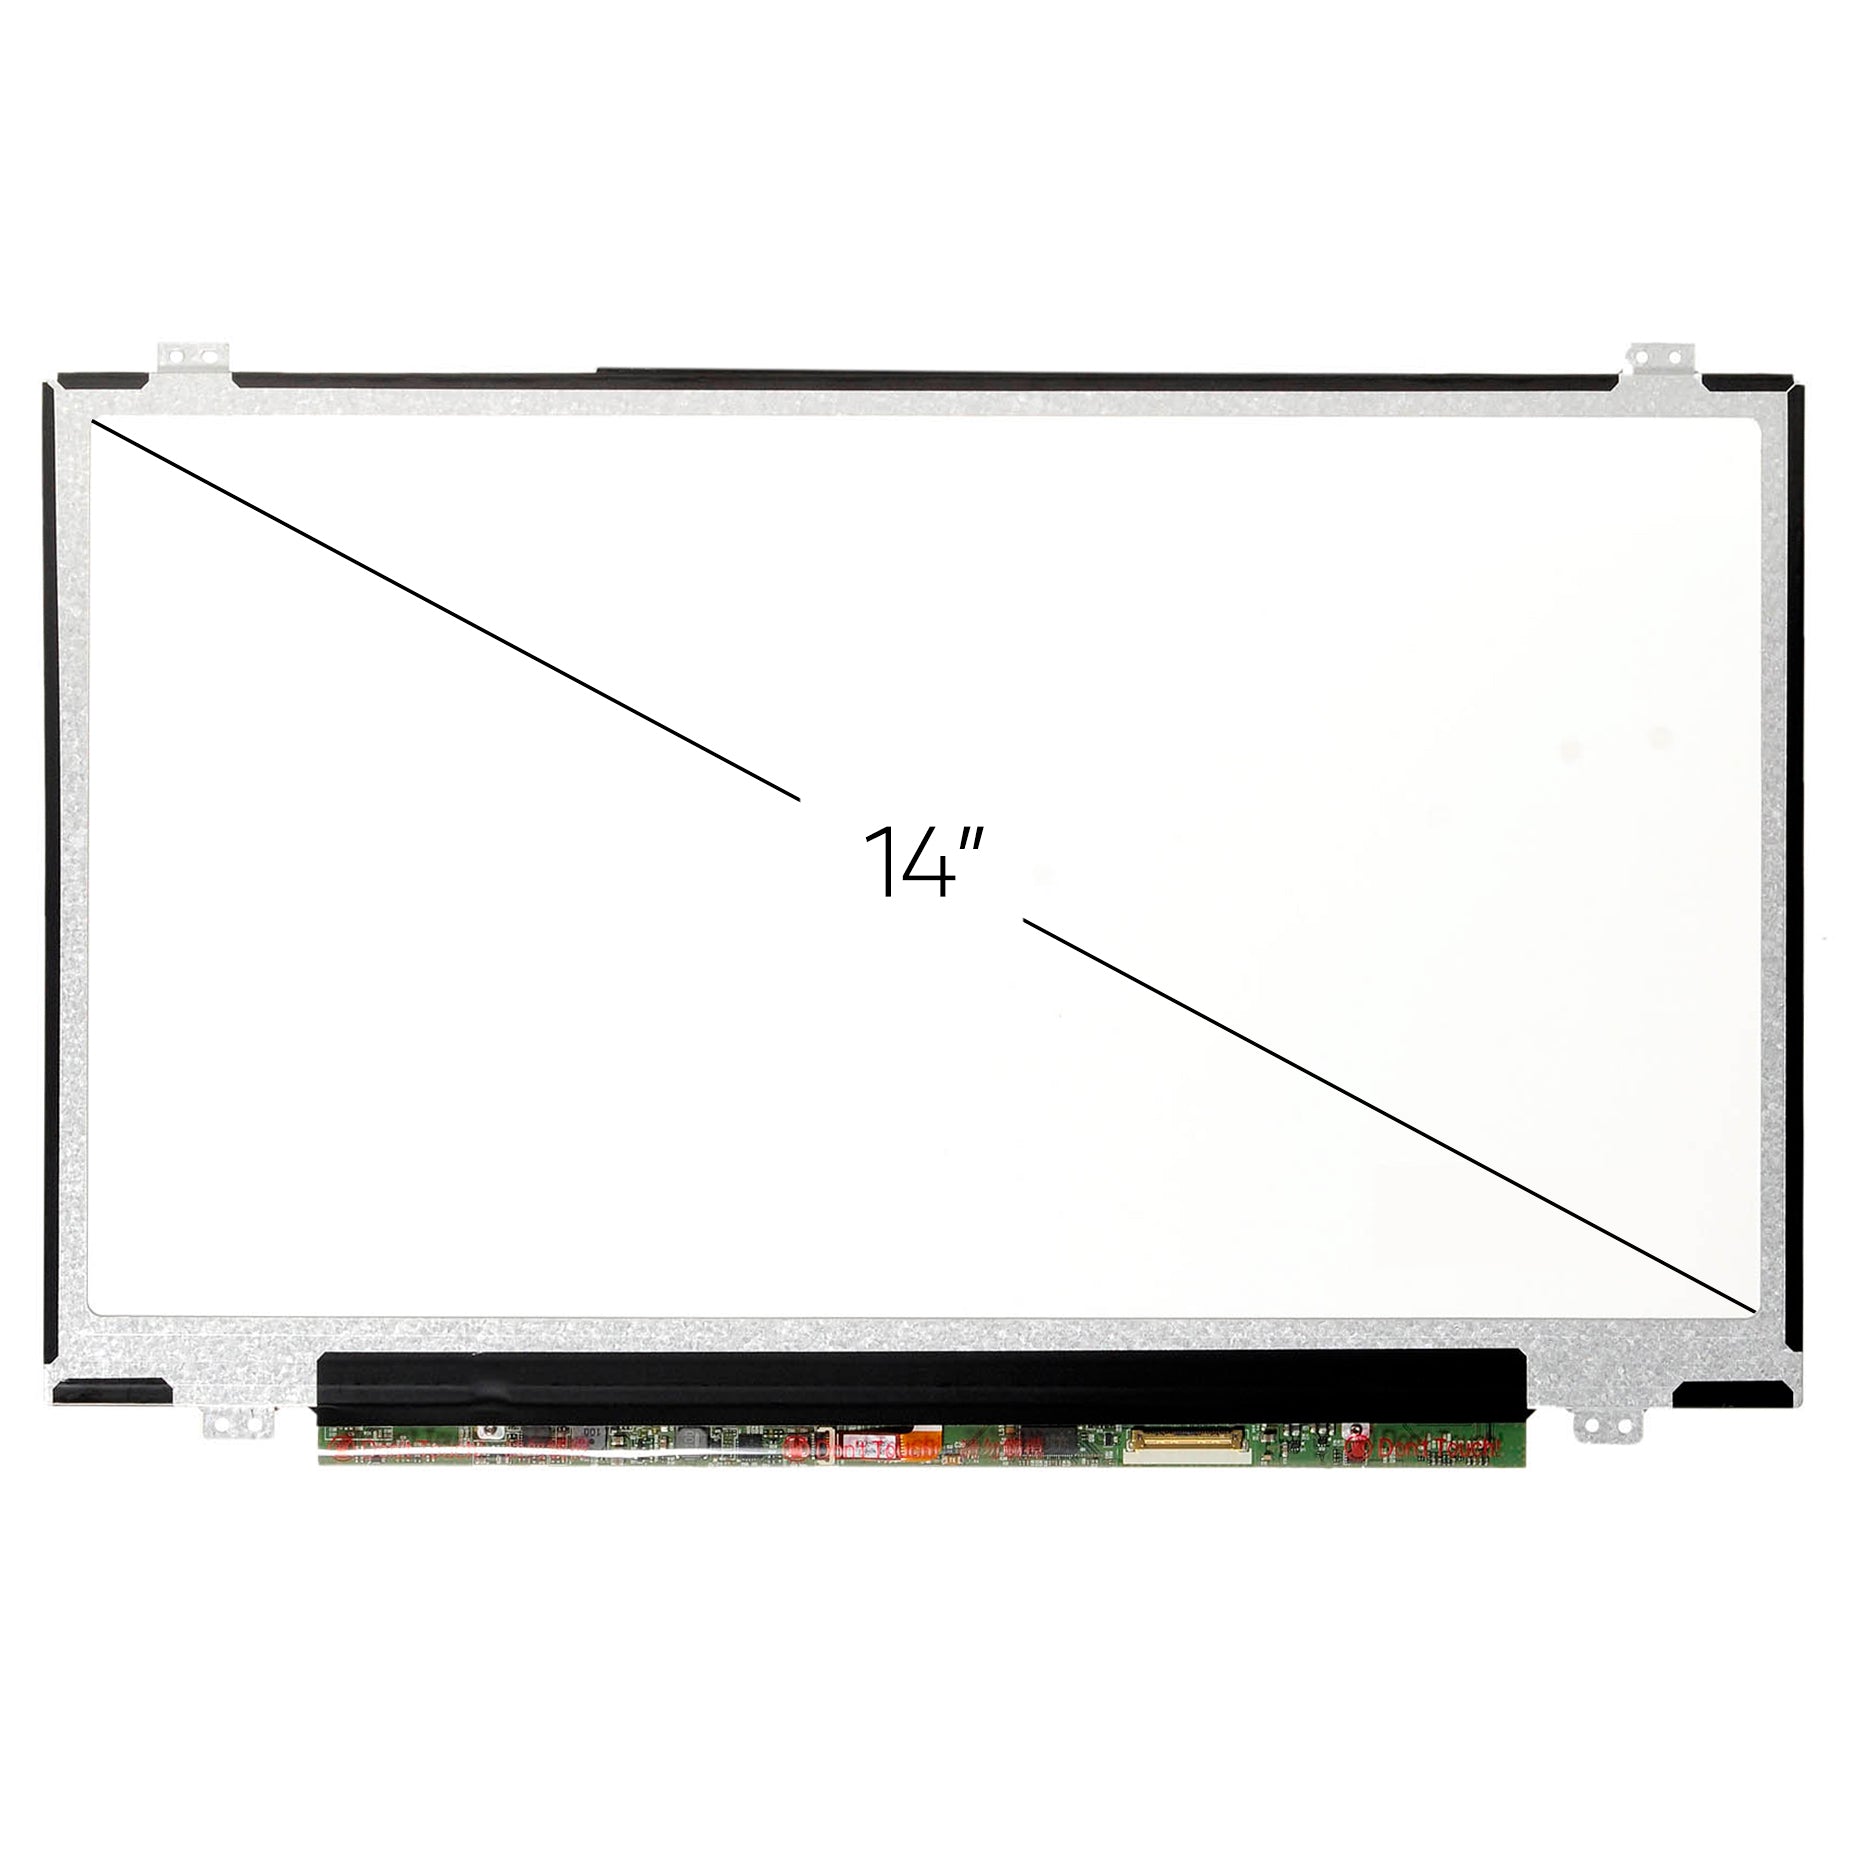 Screen Replacement for B140HAN02.6 FHD 1920x1080 IPS Matte LCD LED Display